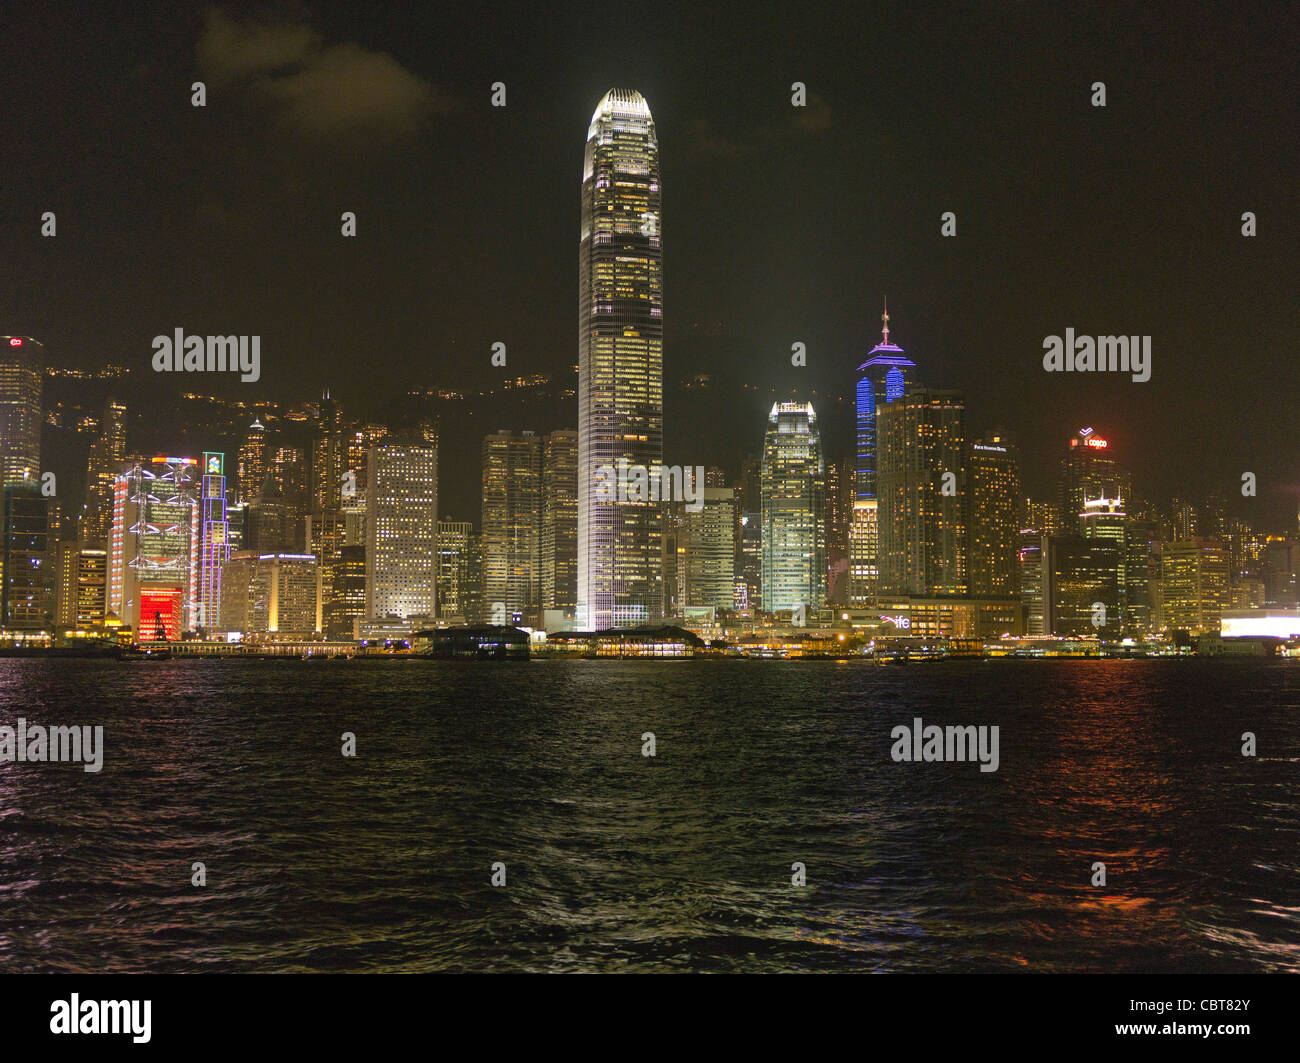 dh  HARBOUR HONG KONG Central skyline at night lights IFC 2 tower and buildings city cityscape Stock Photo